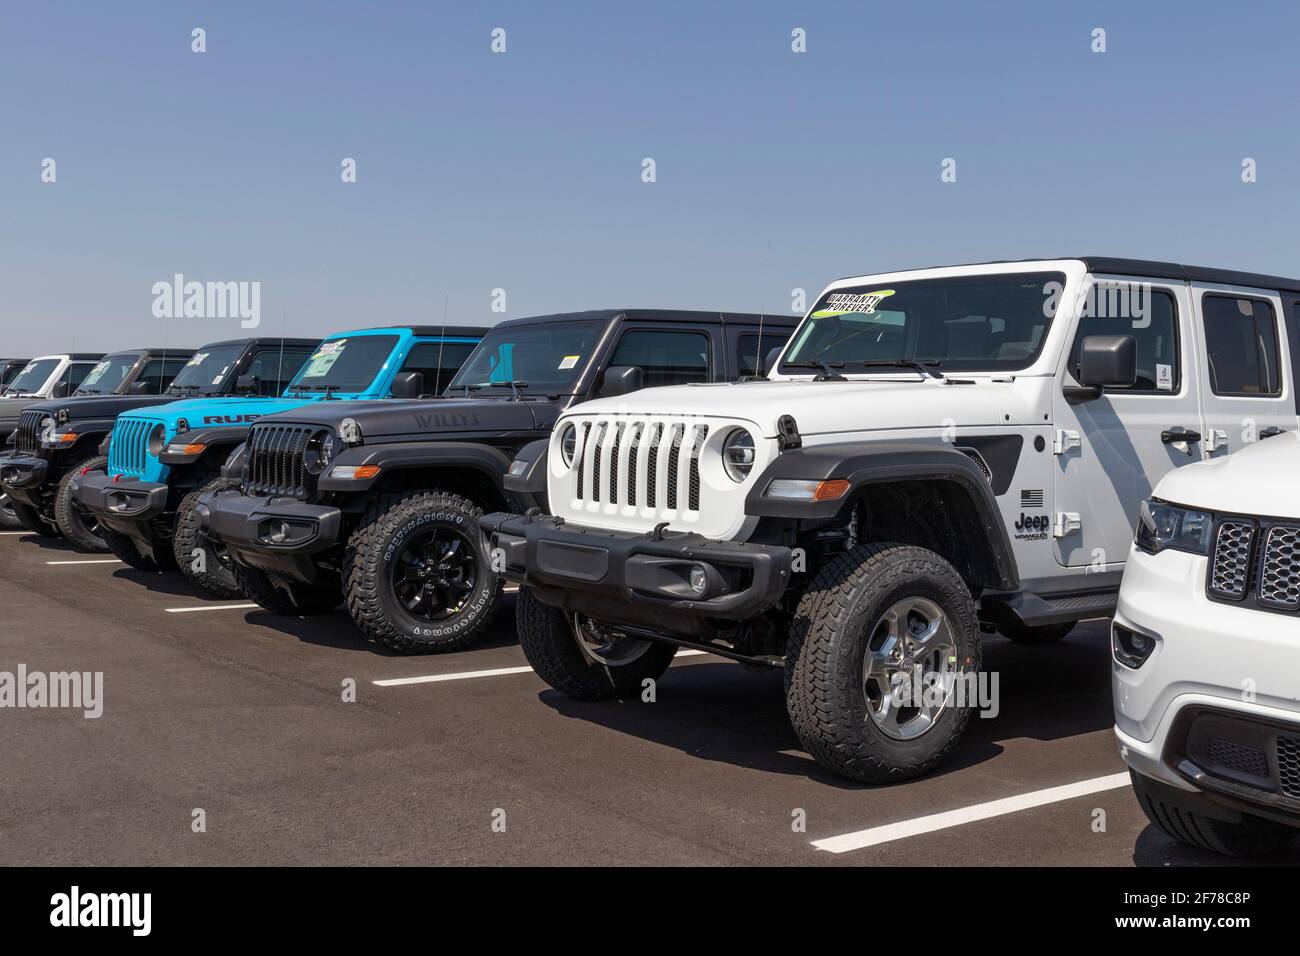 Lafayette - Circa April 2021: Jeep Wrangler display at a Chrysler  dealership. The Stellantis subsidiaries of FCA are Chrysler, Dodge, Jeep,  and Ram Stock Photo - Alamy